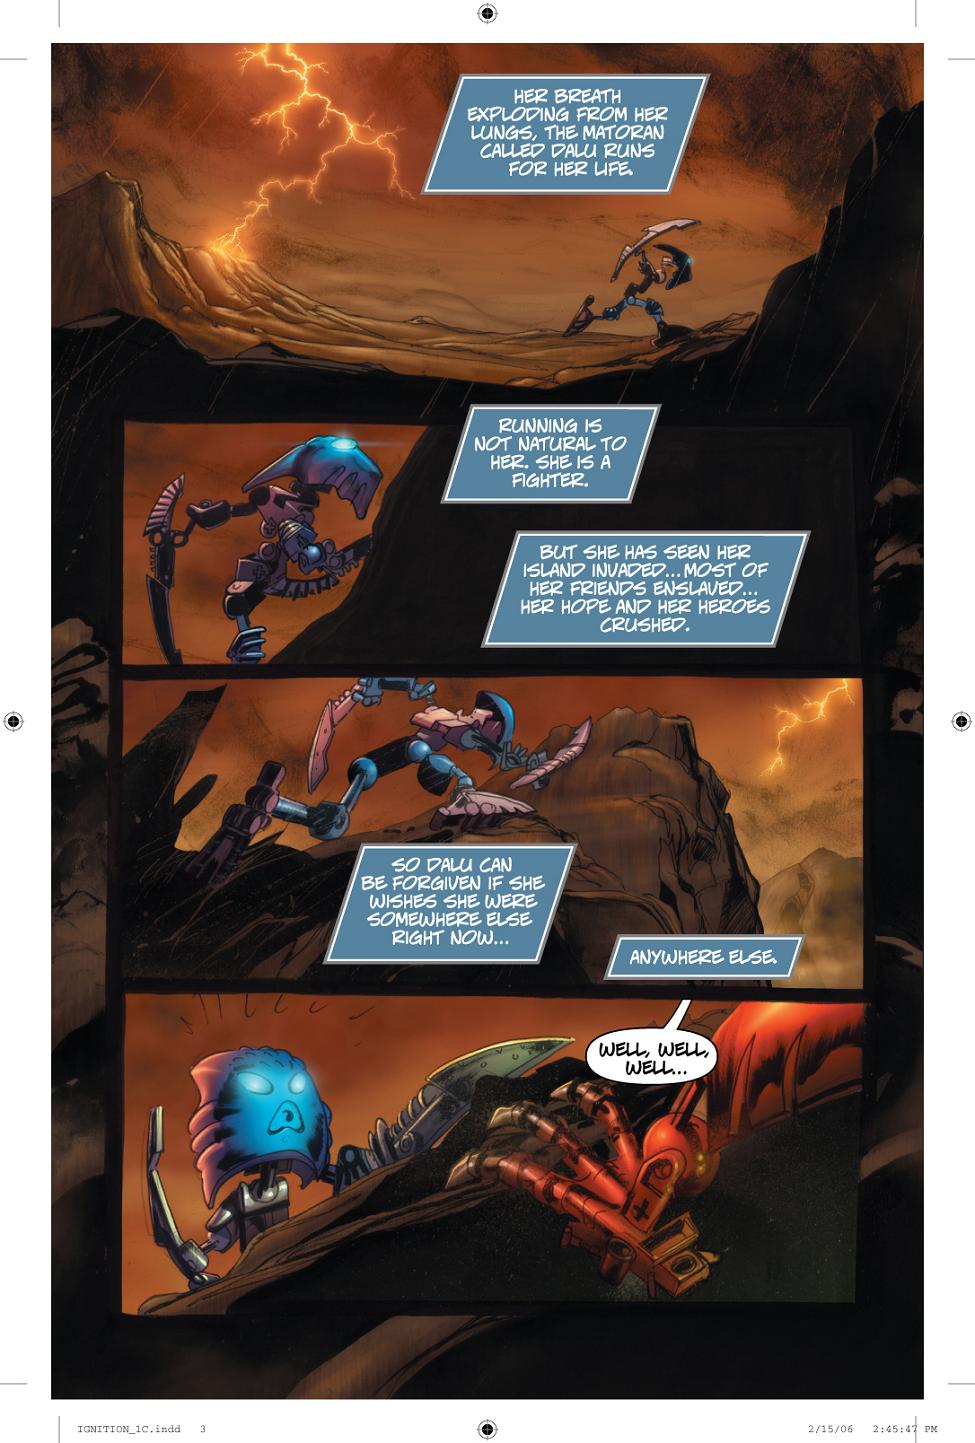 Read online Bionicle: Ignition comic -  Issue #1 - 2